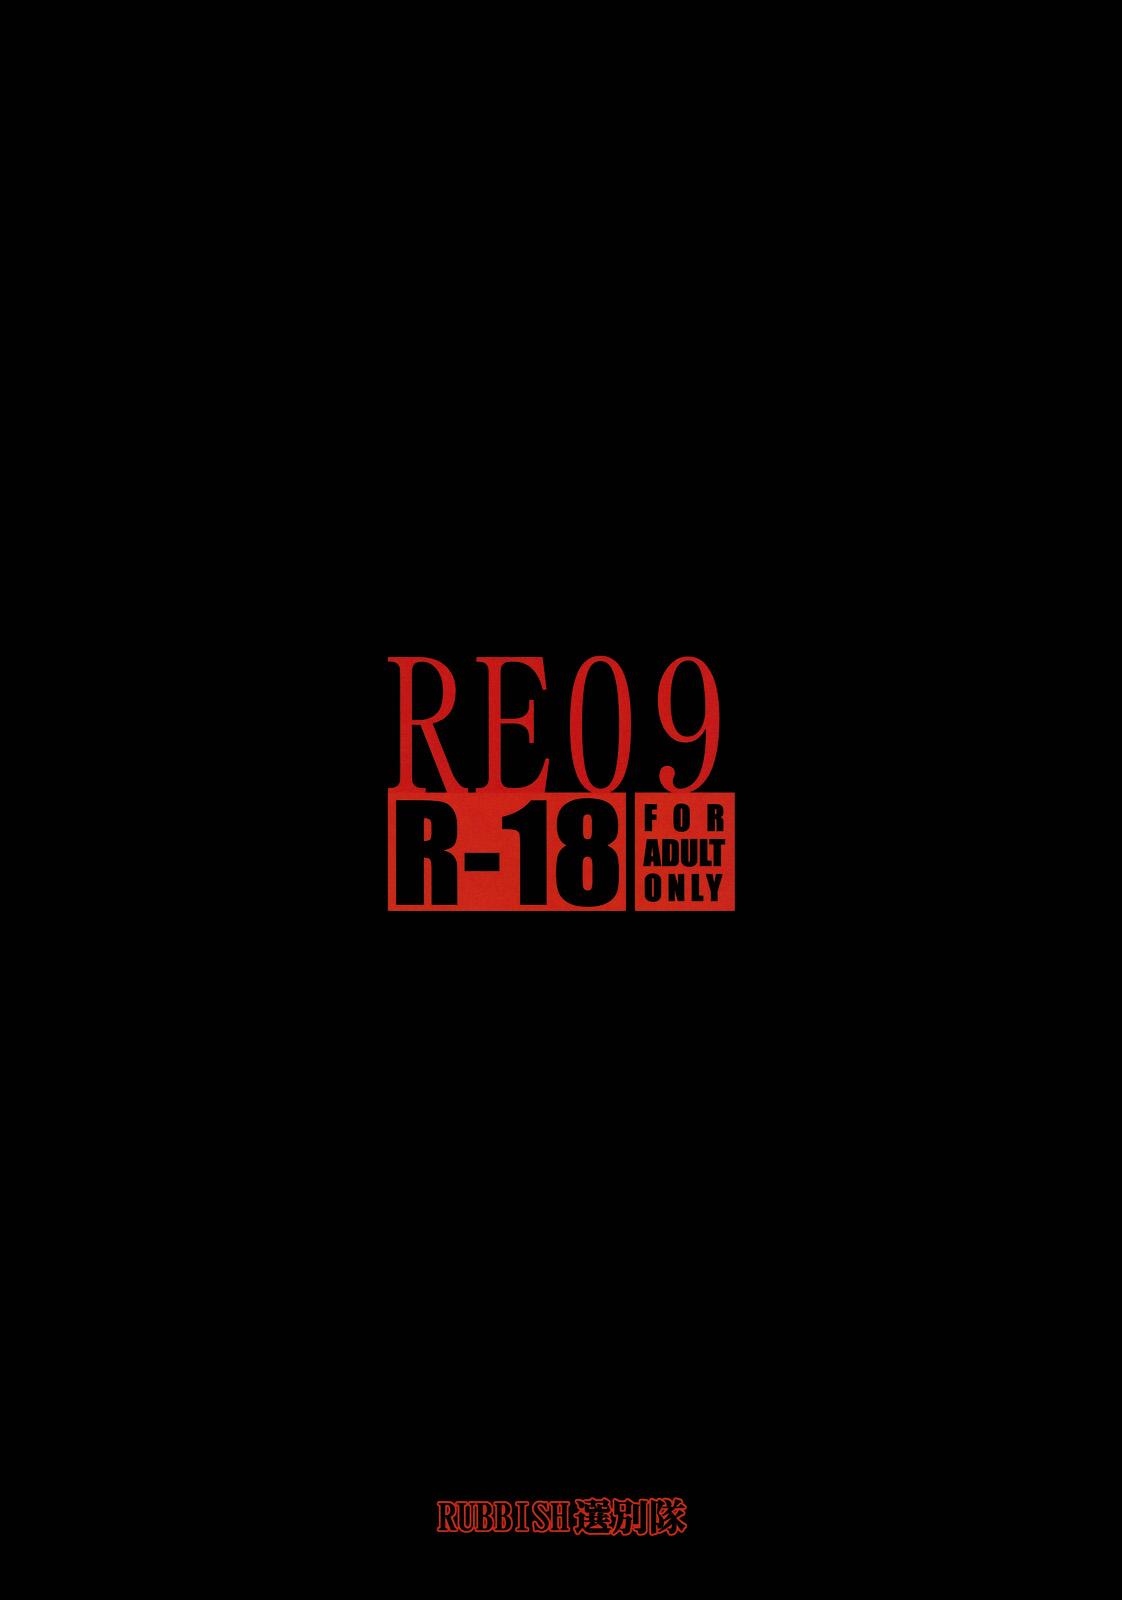 RE 09 33